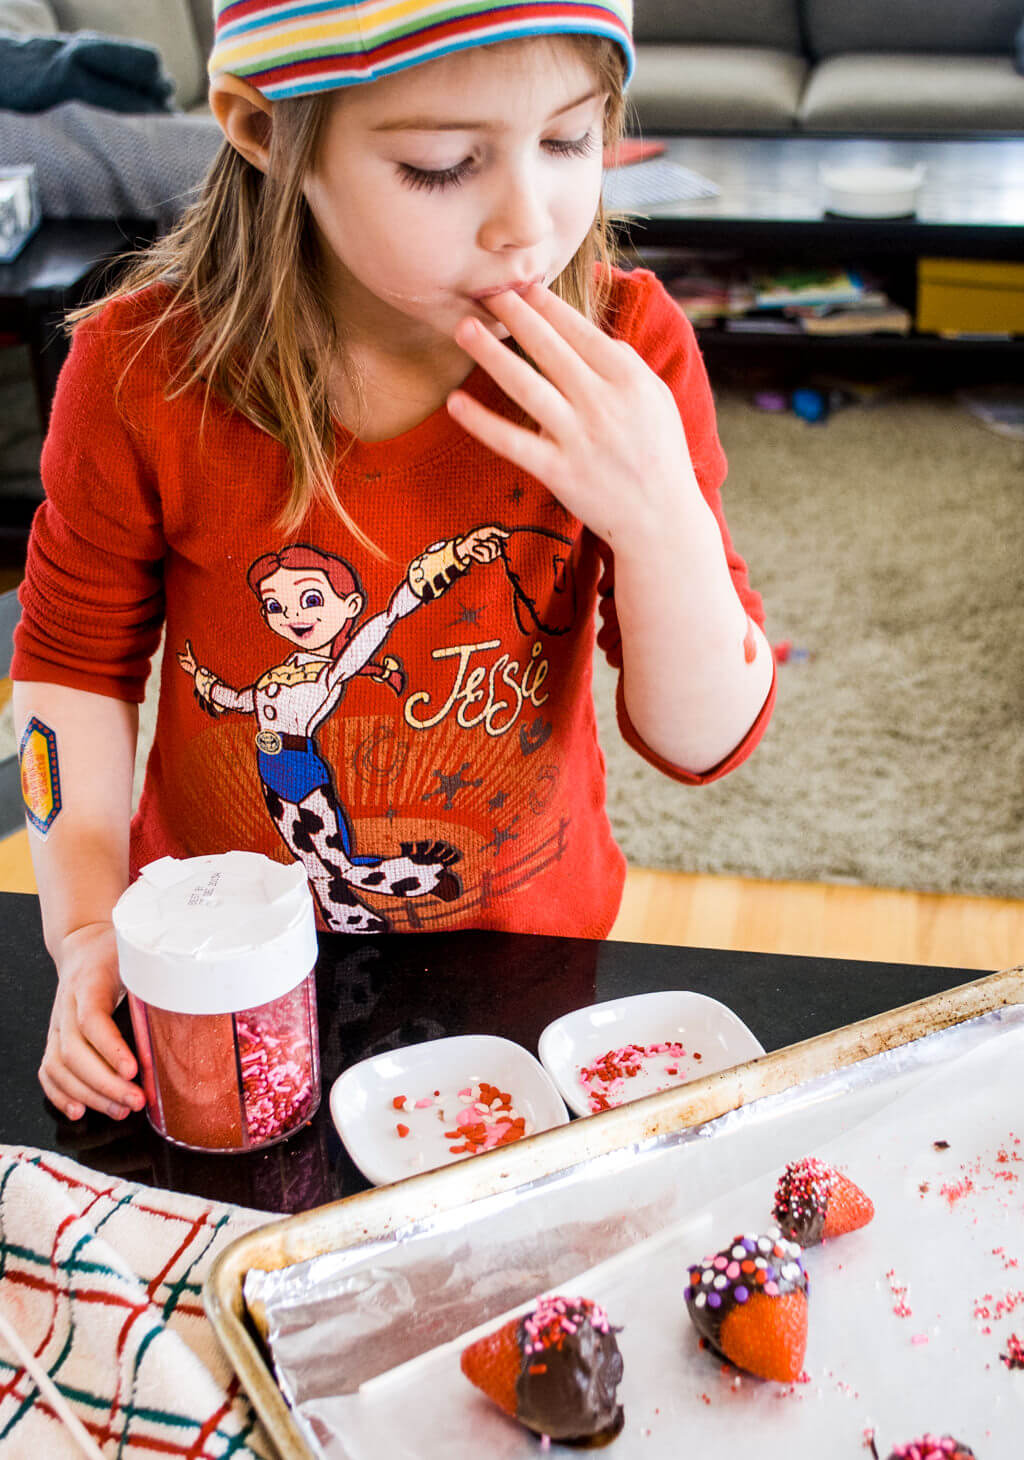 Elise putting sprinkles on chocolate strawberries. Copyright Merriment Design Co. Do not use without written permission.